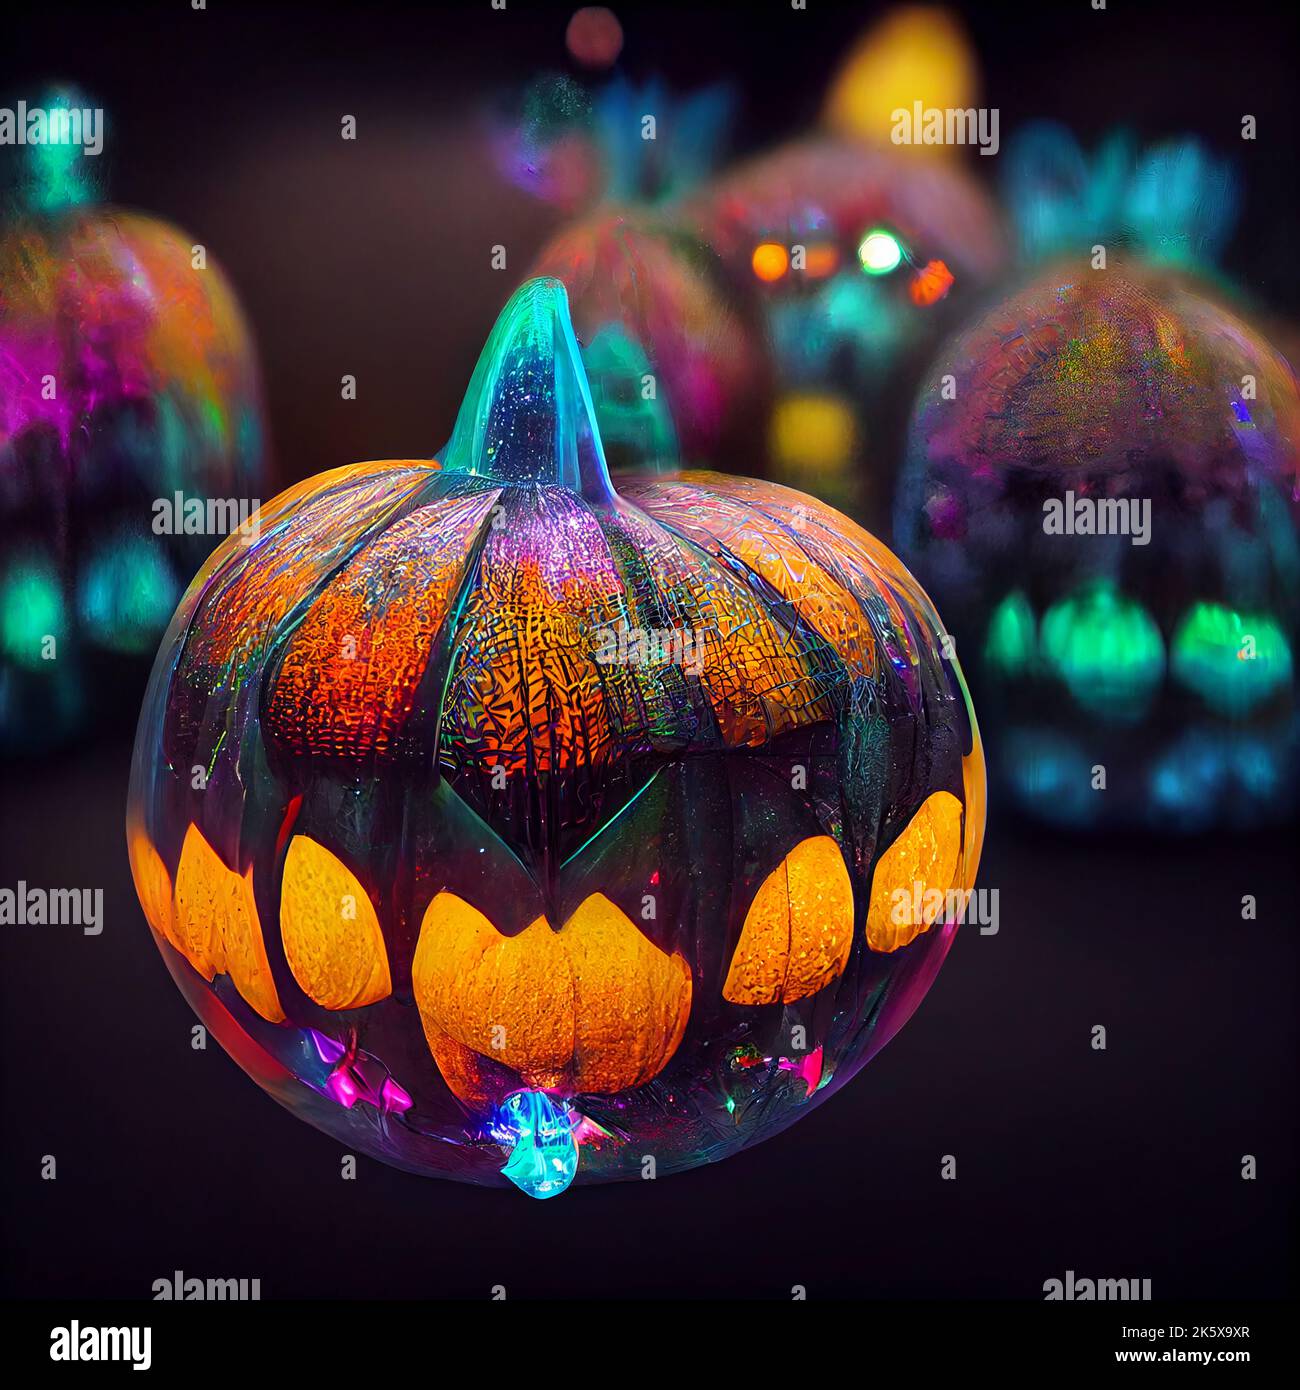 Crystal pumpkins covered in cobwebs, discovered in a cellar. Iridescent light plays on the surface with a spectrum of colors, lit from inside. Stock Photo